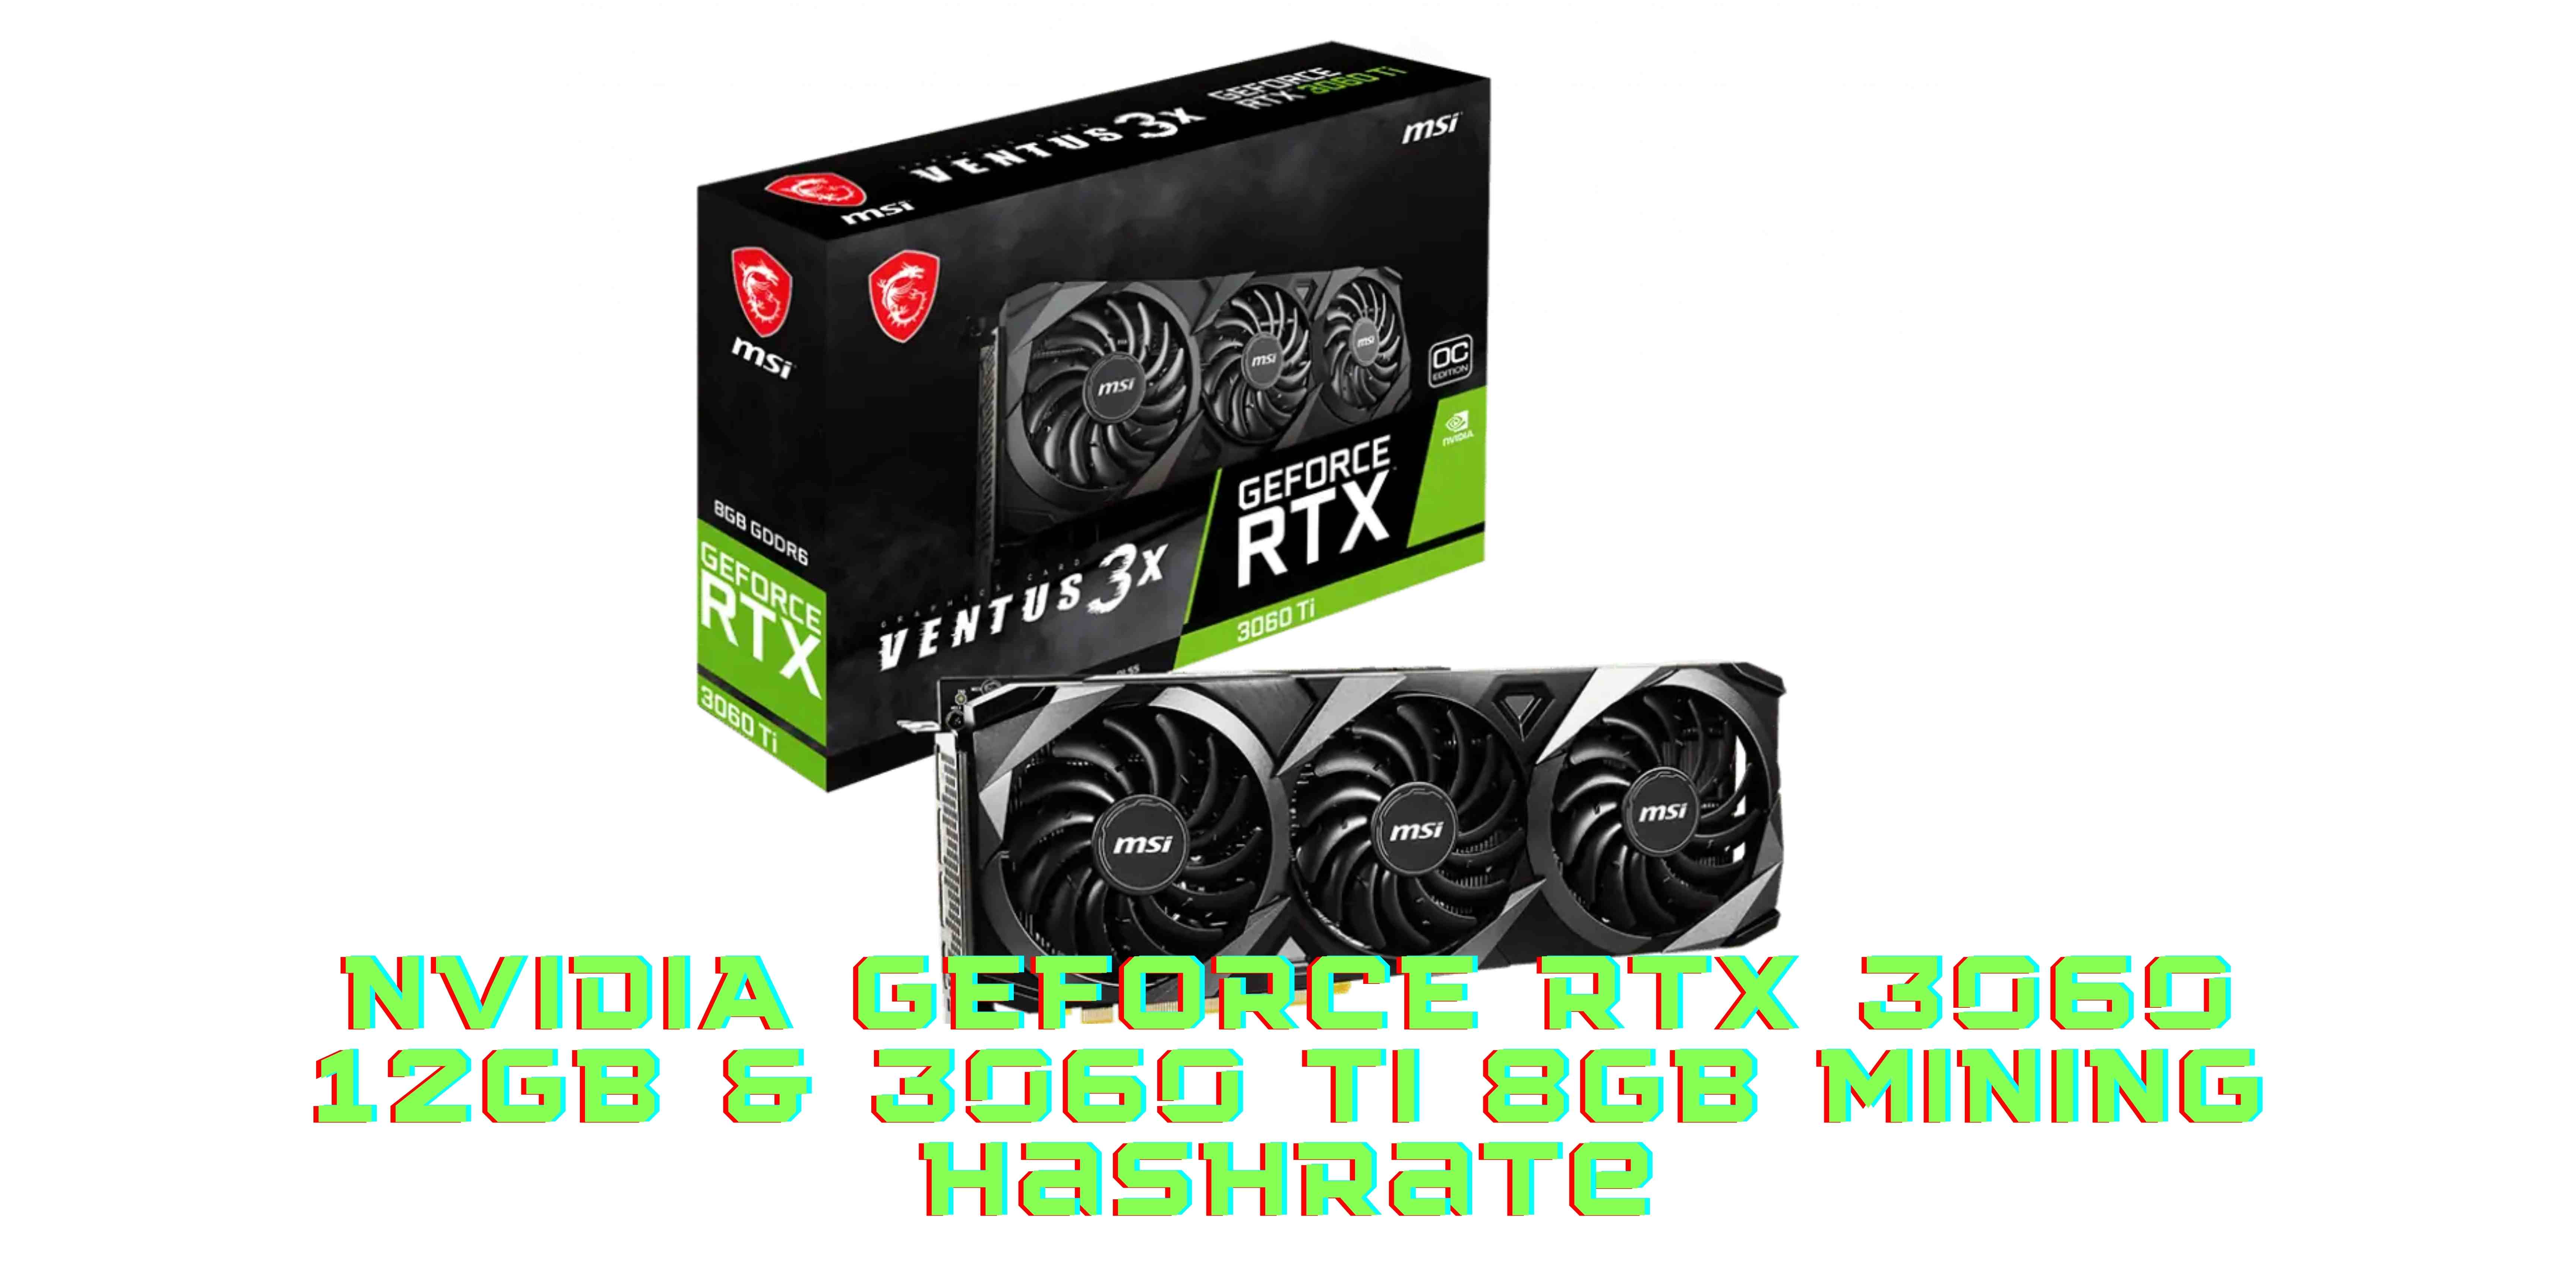 Which Is The Best? The Comparison Of The NVIDIA RTX 3060 And 3060 Ti Mining Hashrate